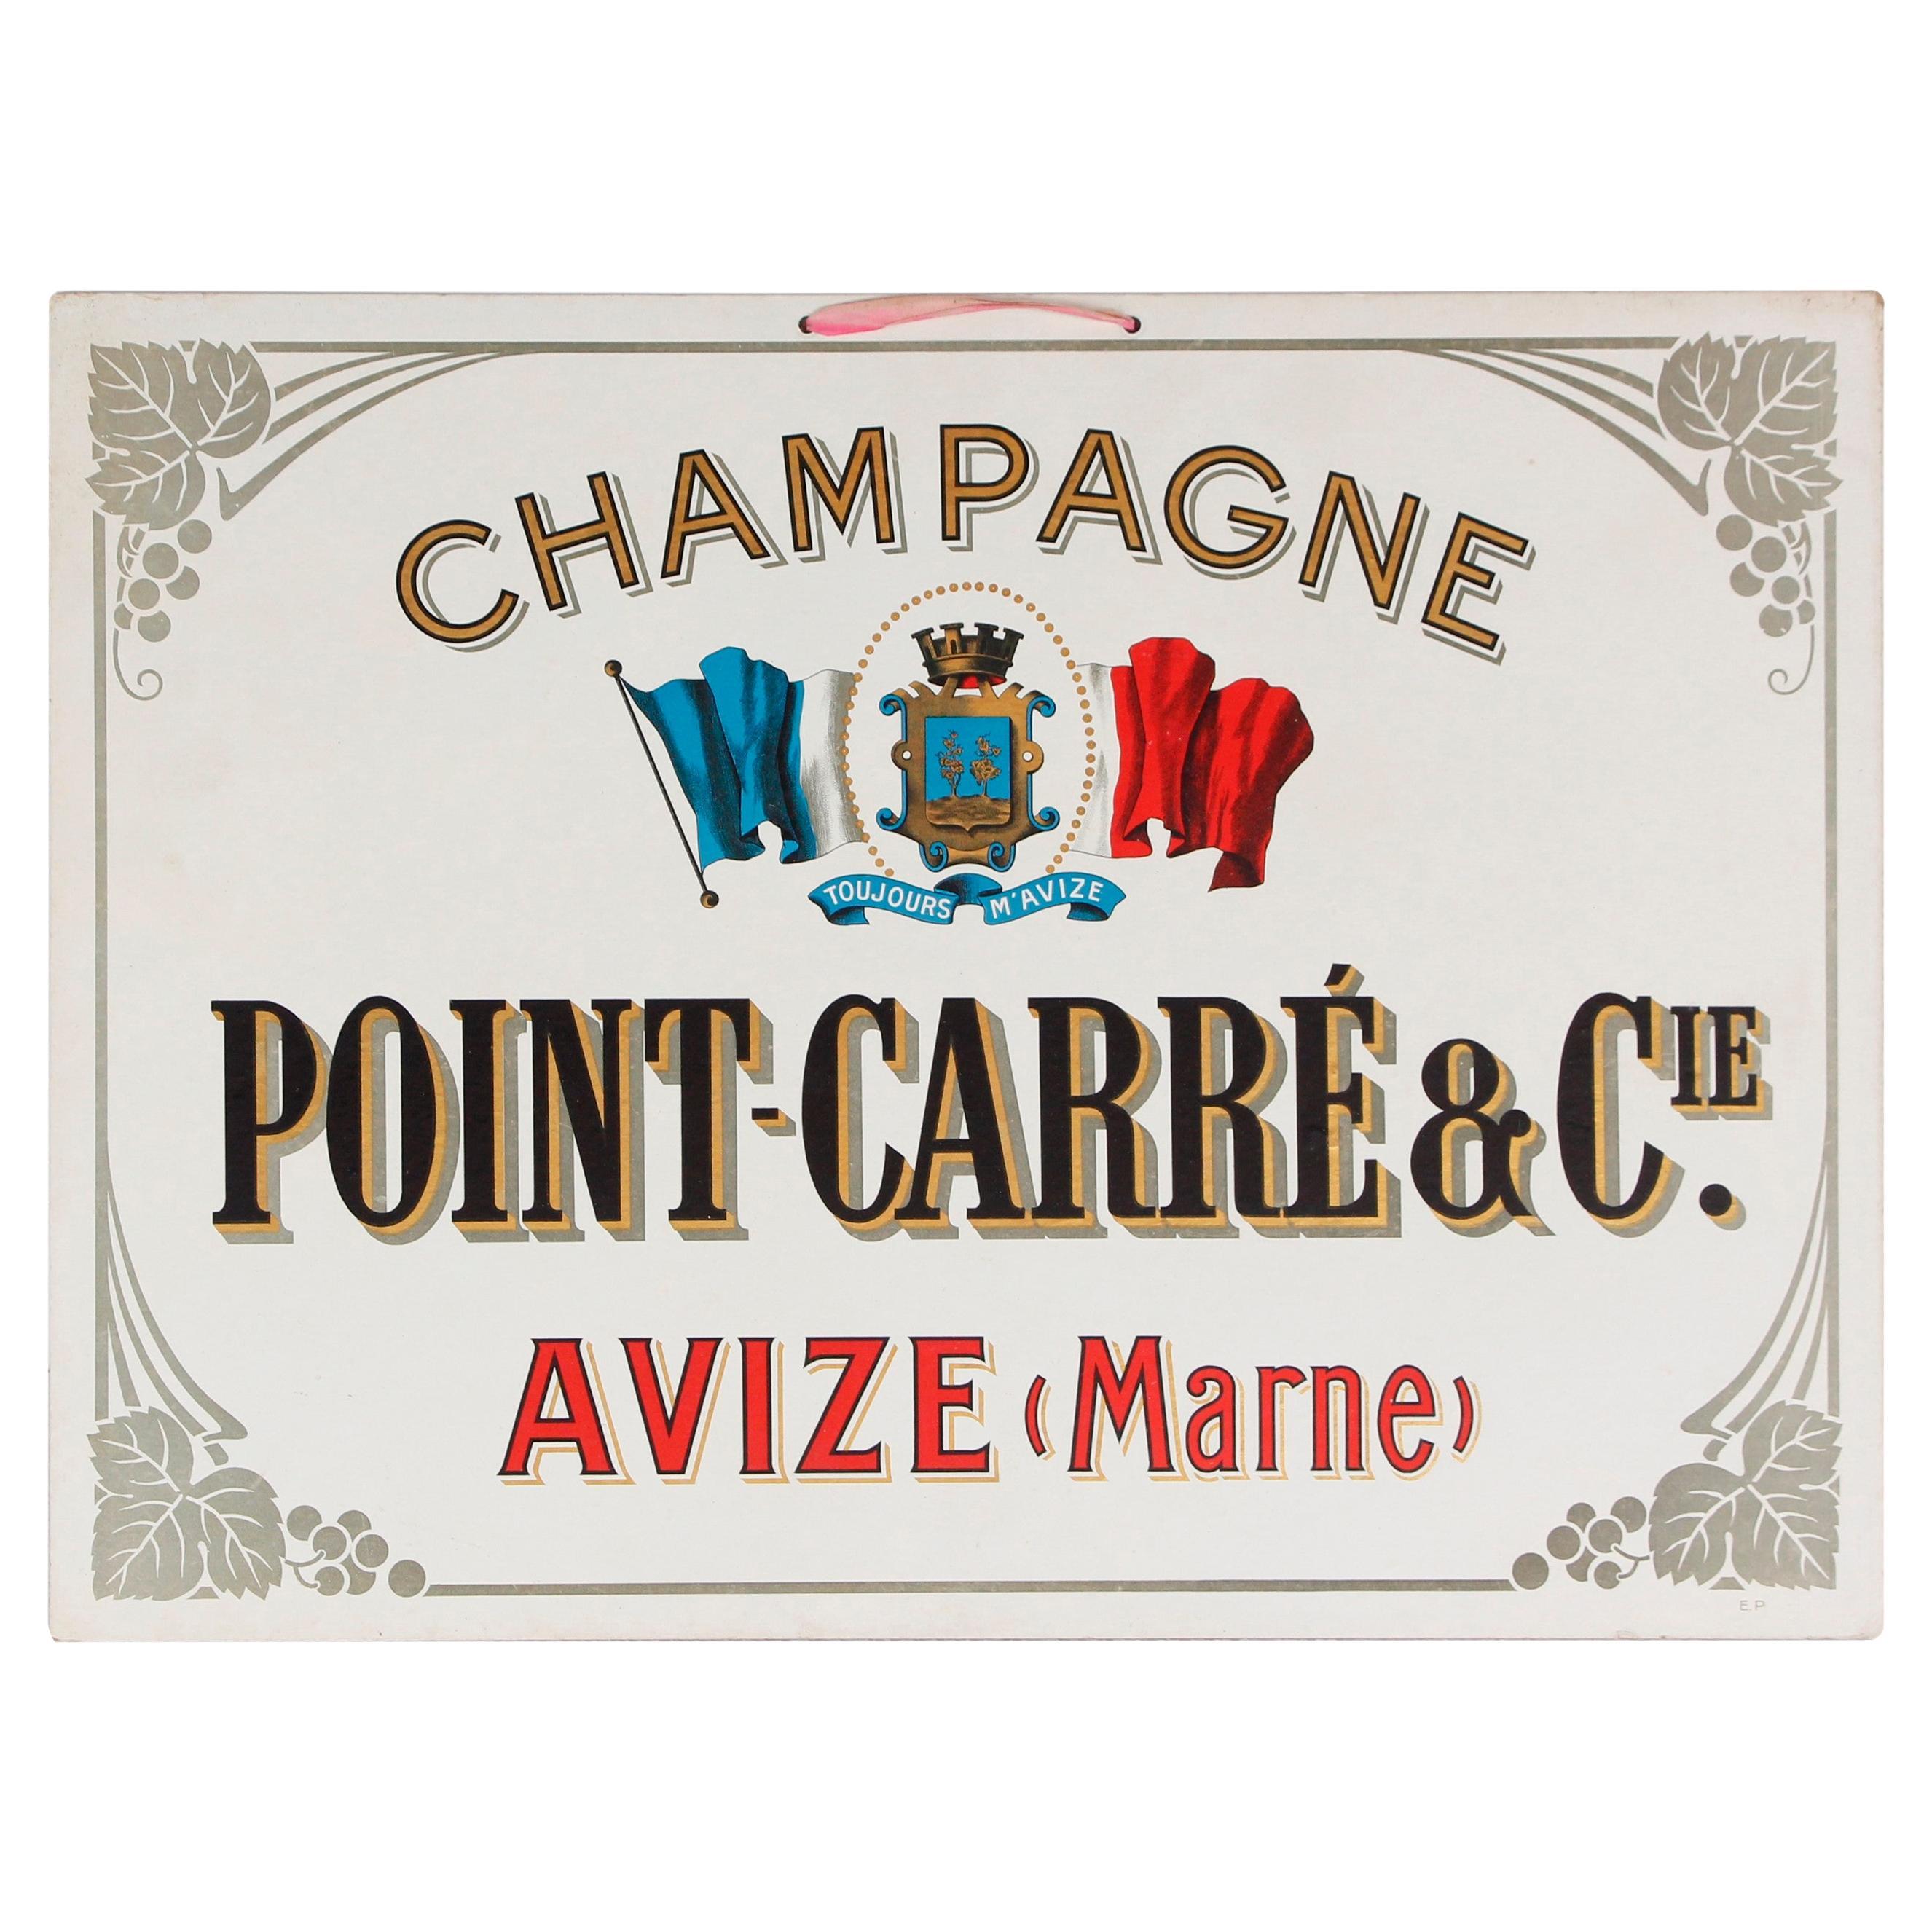 European Champagne Point Carre & C. Sign For Sale